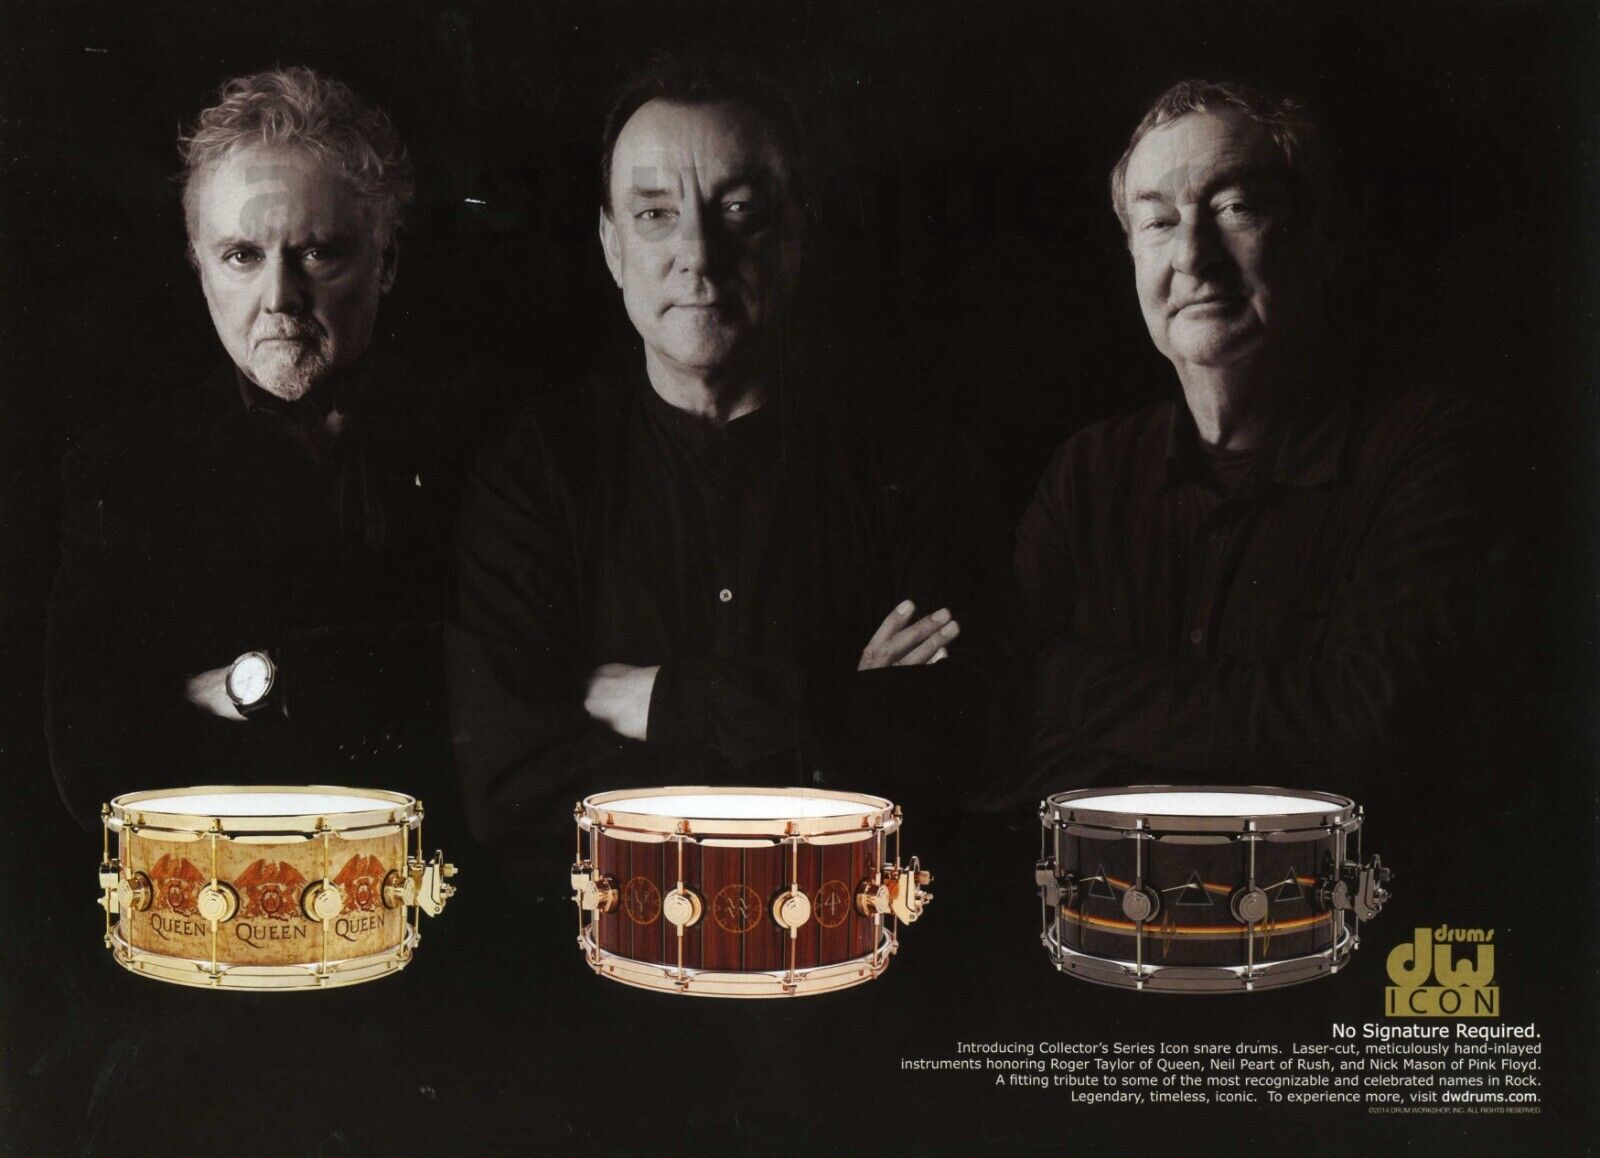 2015 DW Icon Snare Drums feat Neil Peart Roger Taylor Nick Mason PRINT AD (1354)